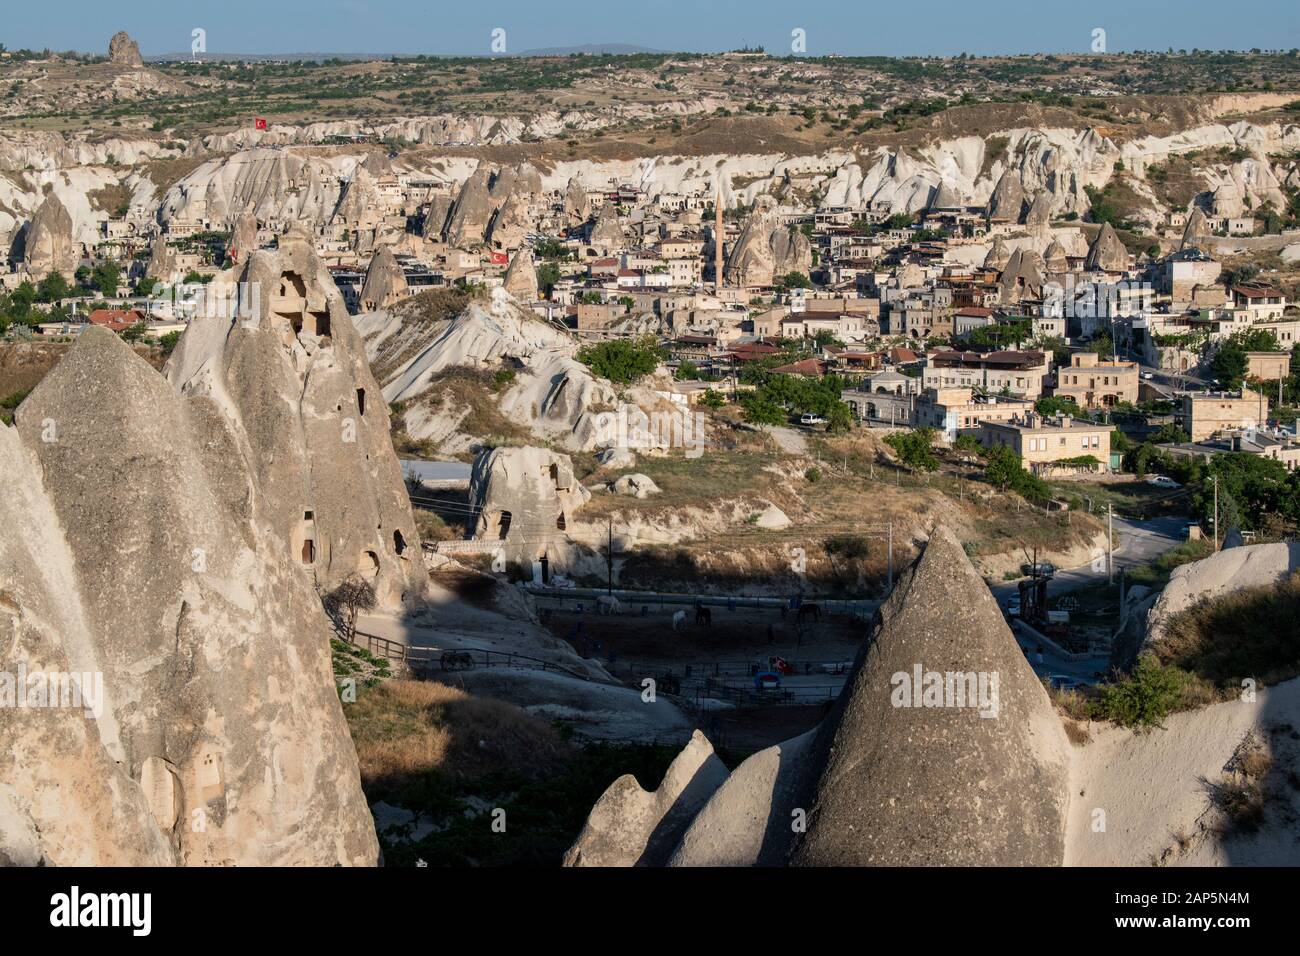 Cappadocia, Turkey: landscape of the famous region resulted from thousands of years of volcanic activity and erosion, shaping tuff into many forms Stock Photo